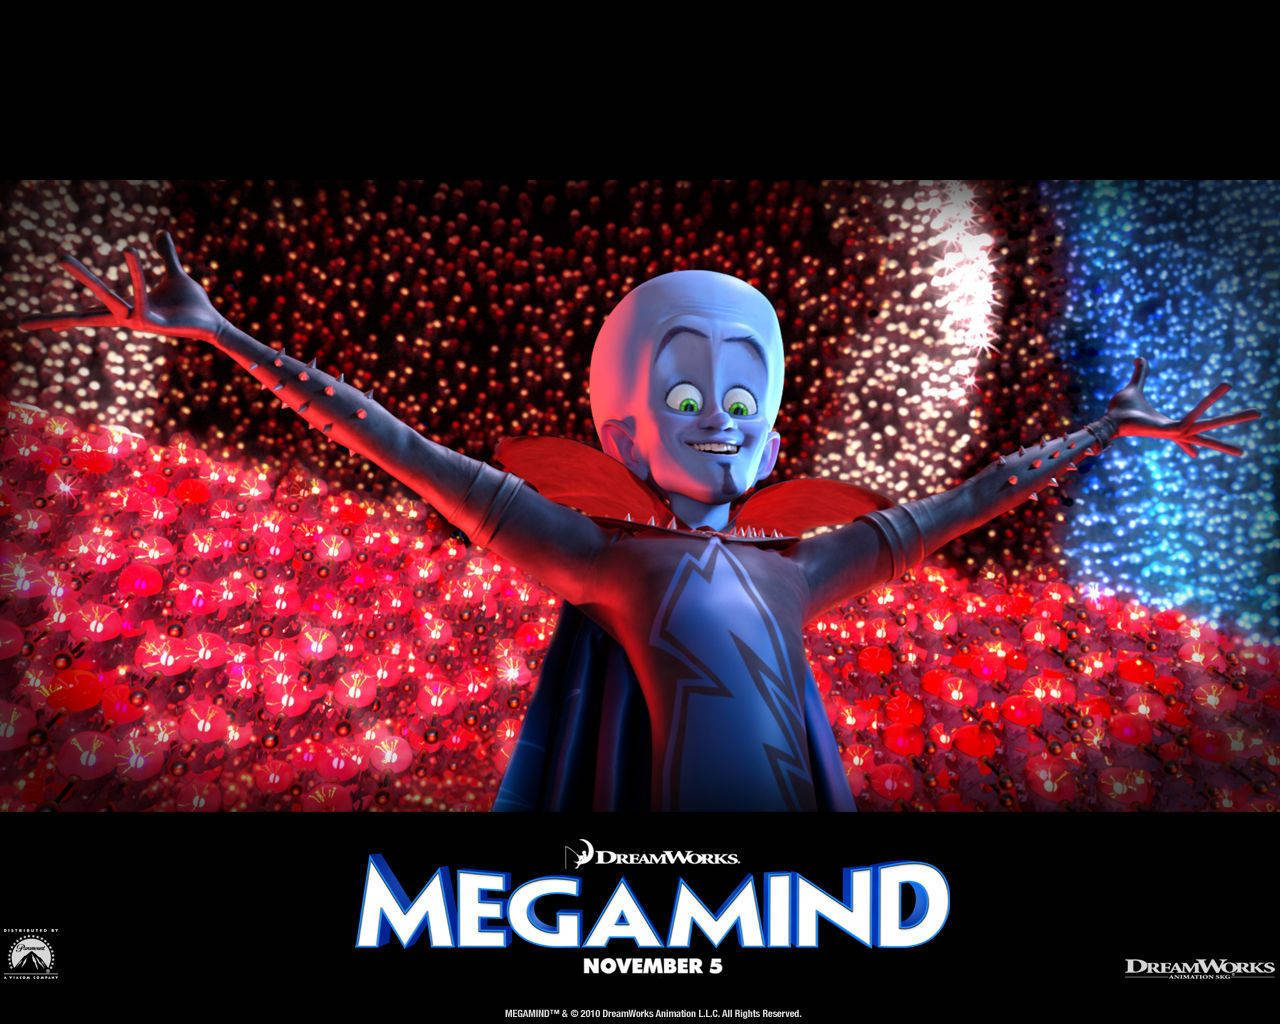 Megamind Illuminated In Red And Blue Lights